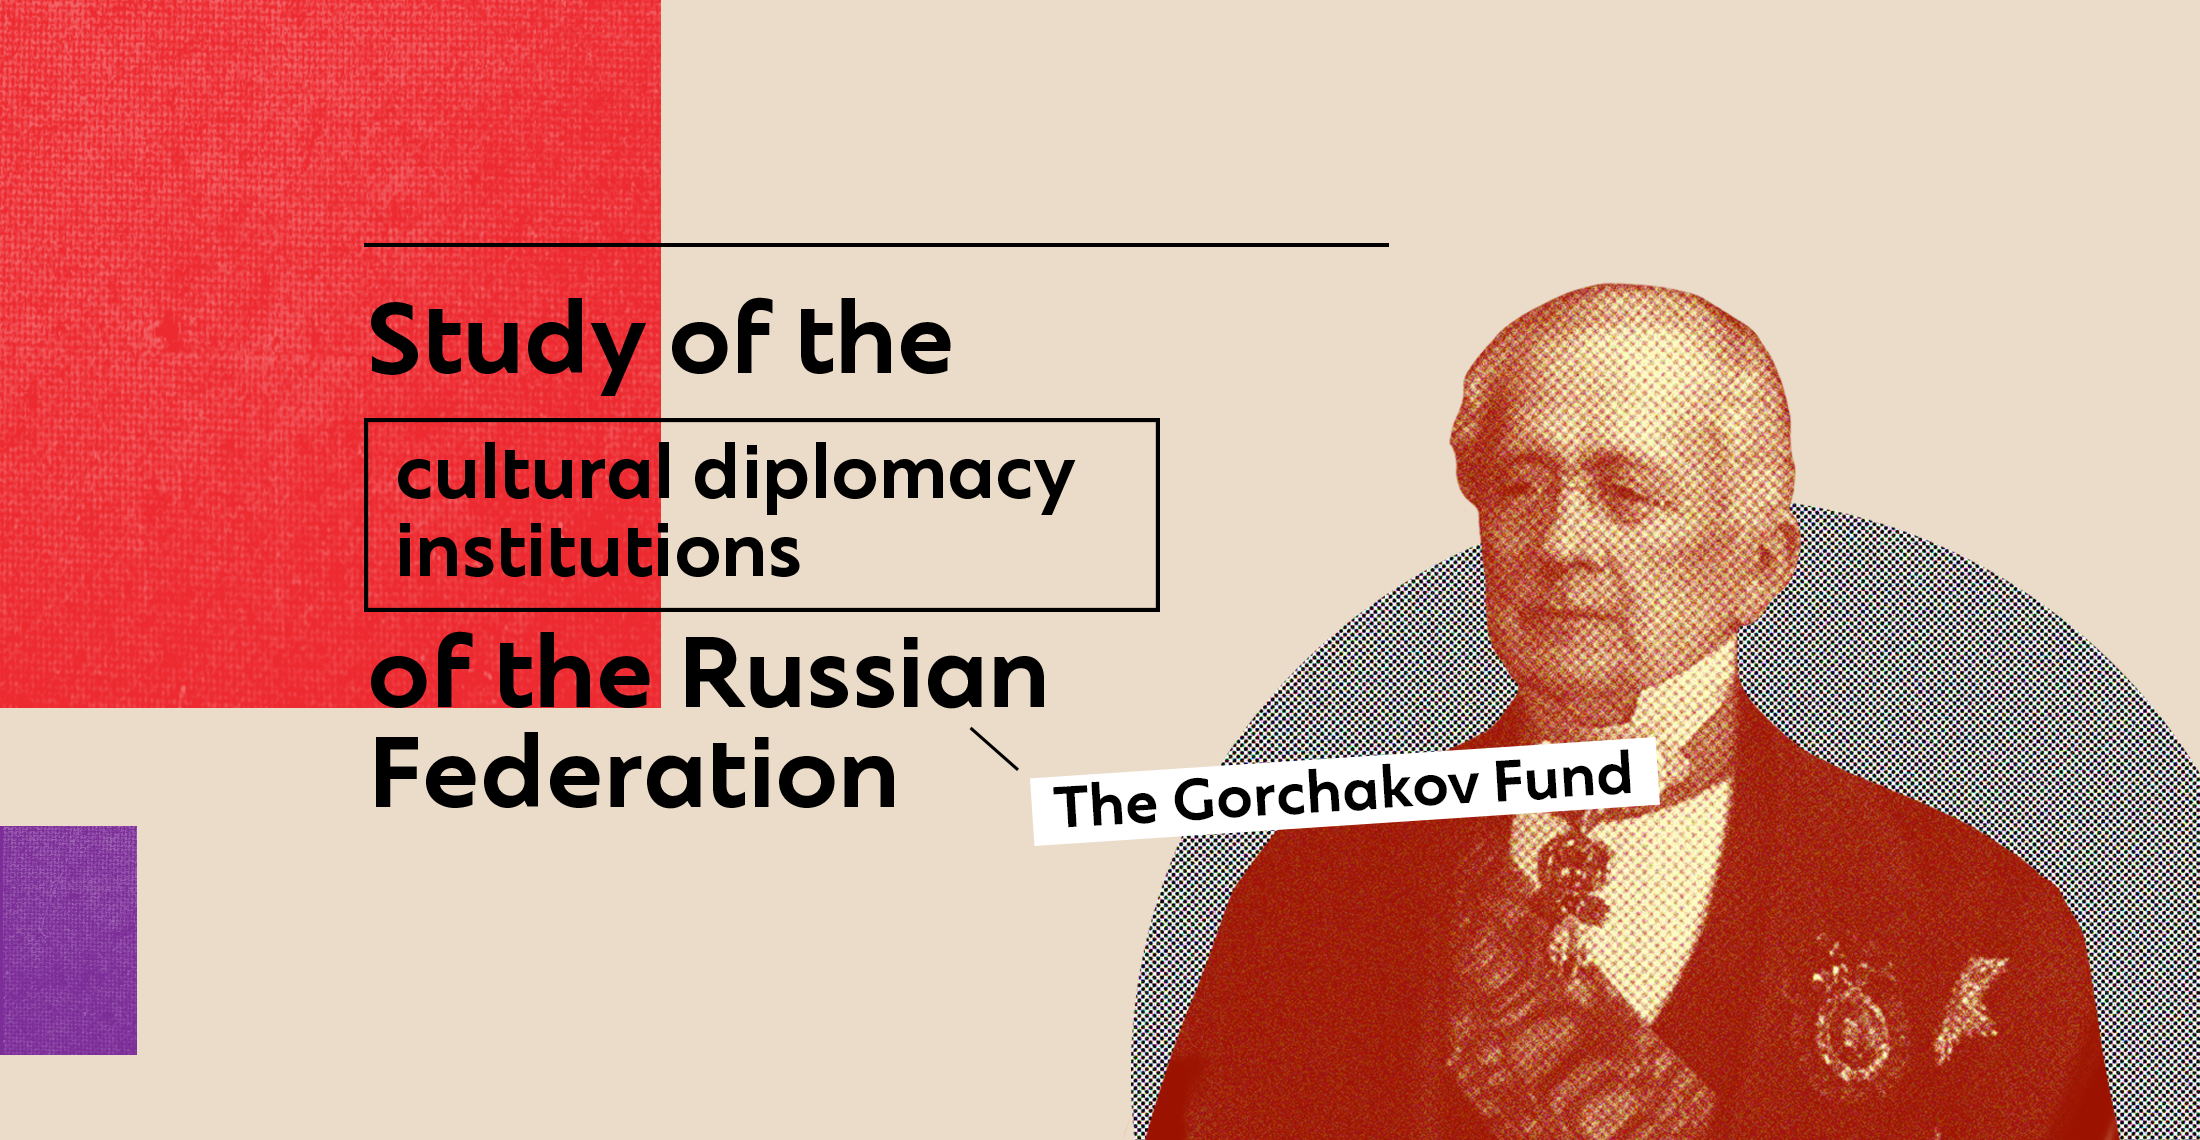 https://ui.org.ua/wp-content/uploads/2022/05/banner-the-gorchakov-fund.png